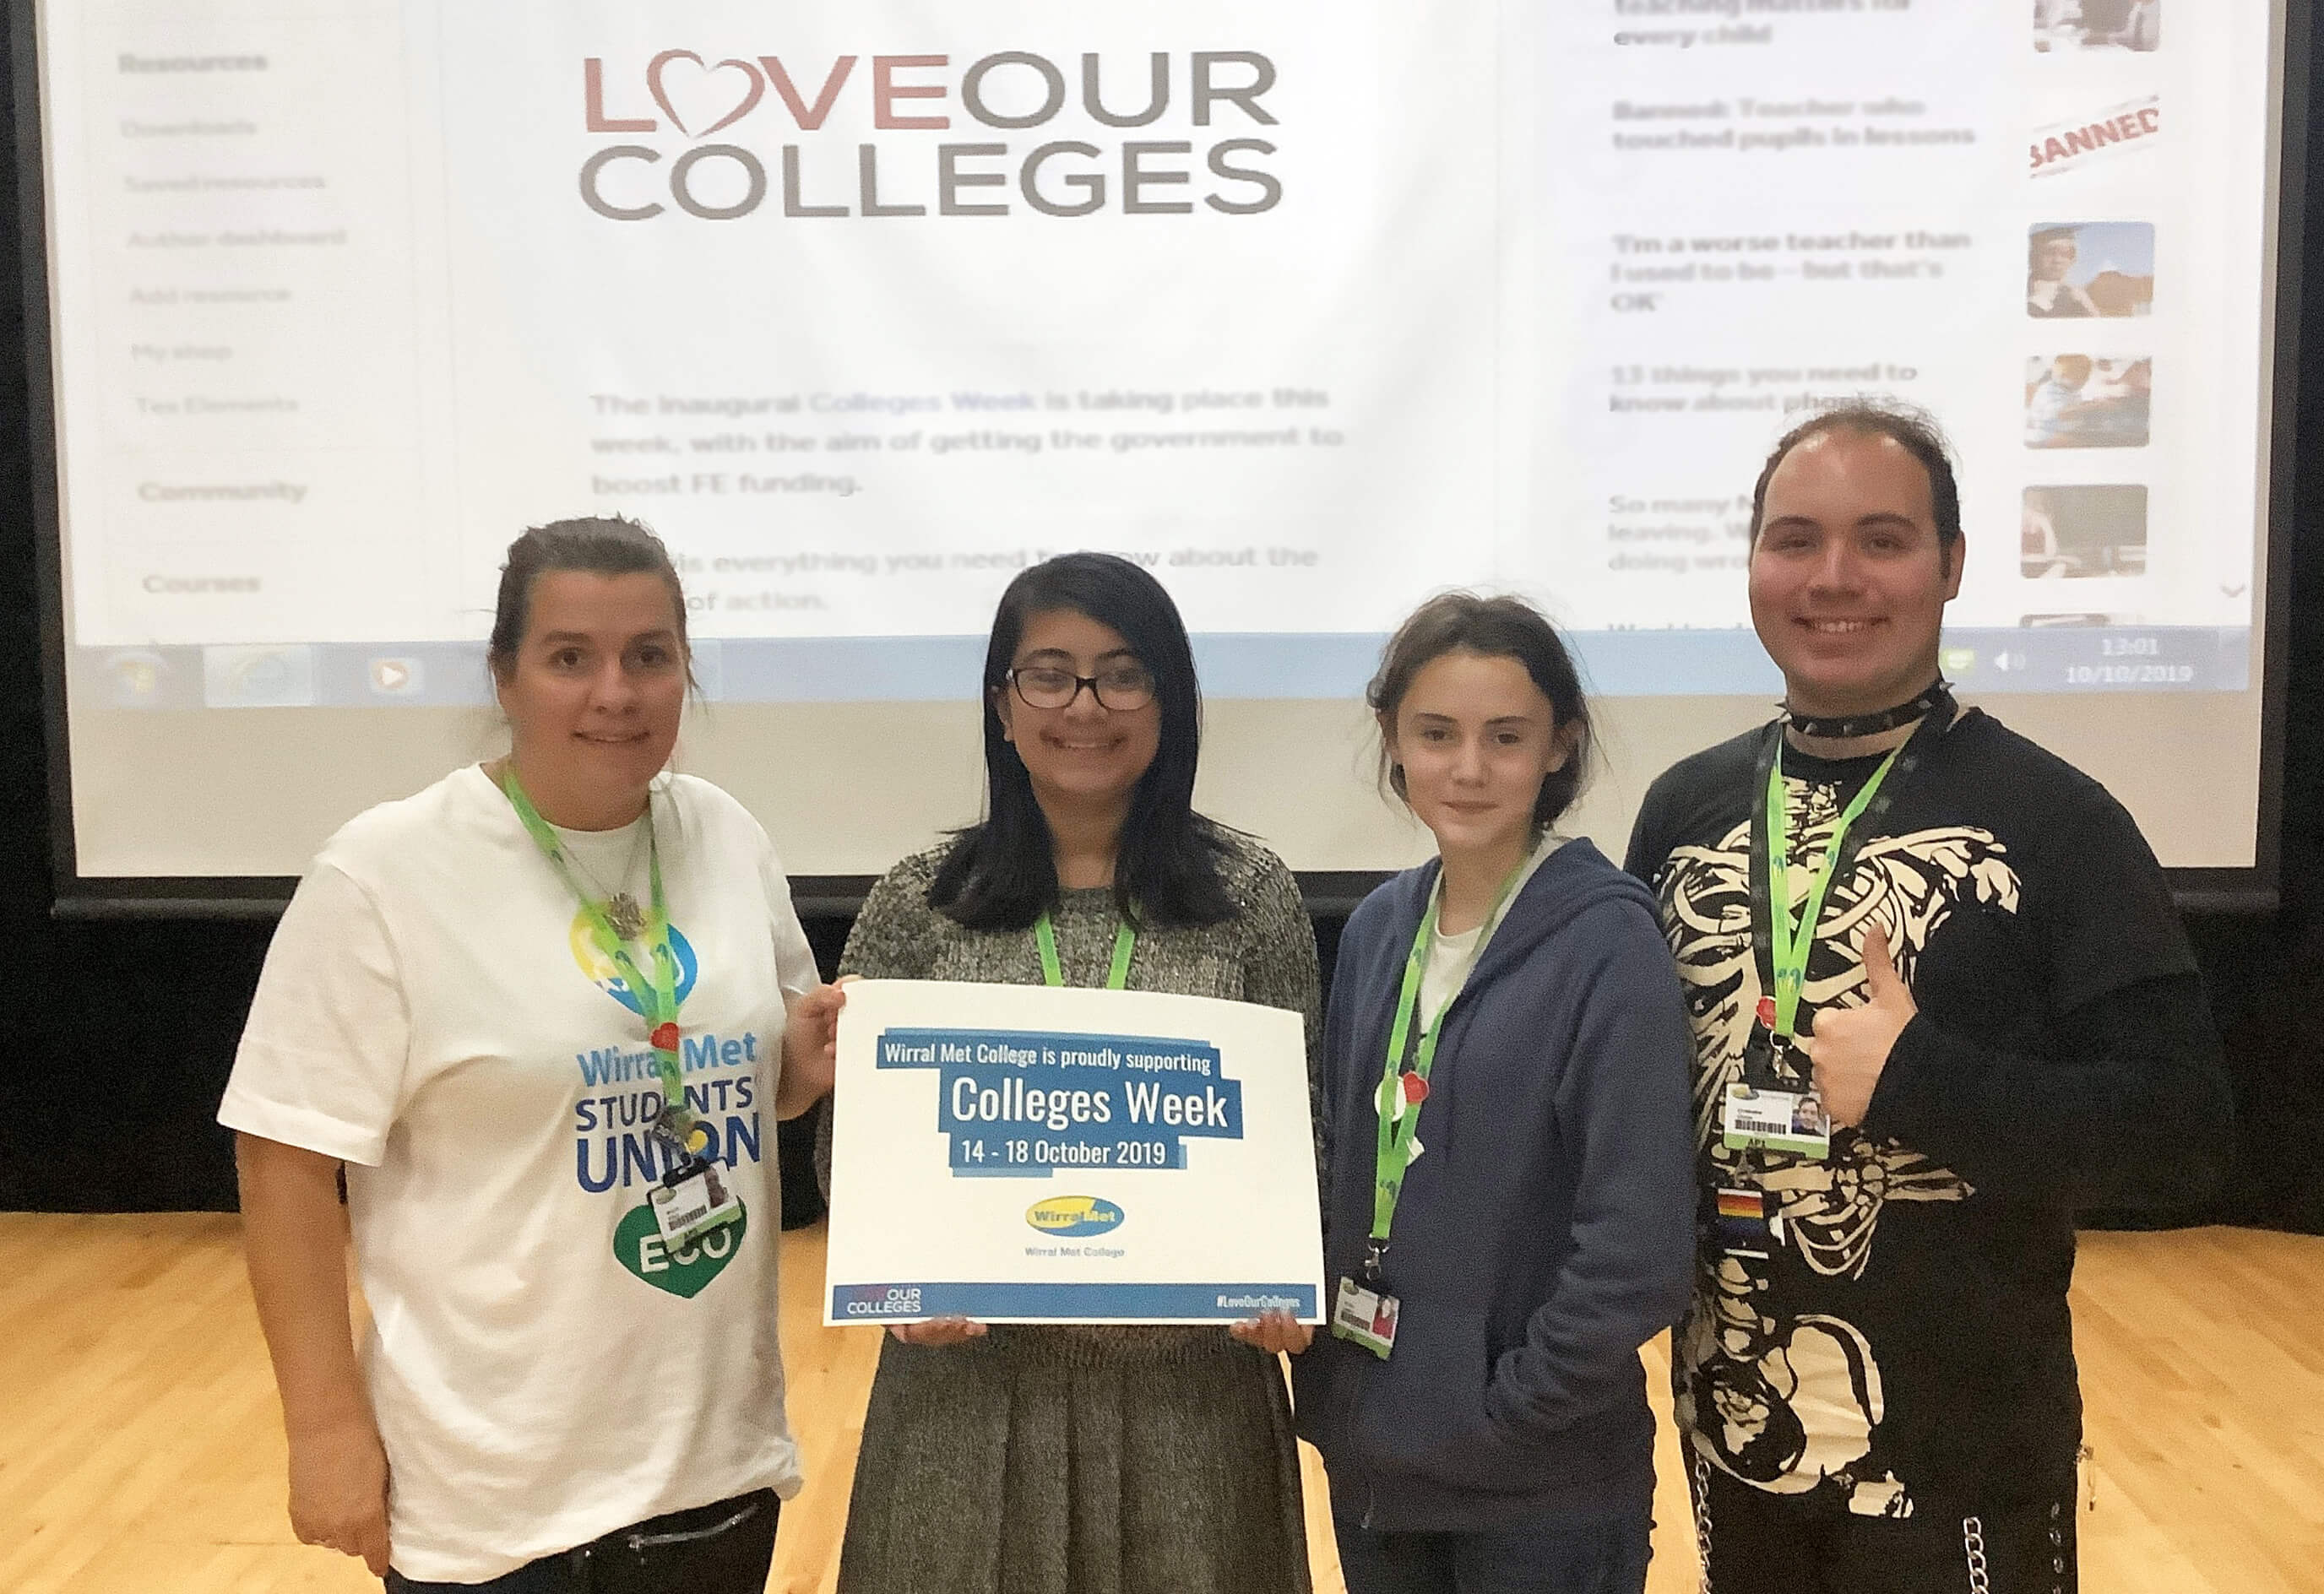 Four students stand in front of a Love Our Colleges board holding a poster supporting Colleges Week